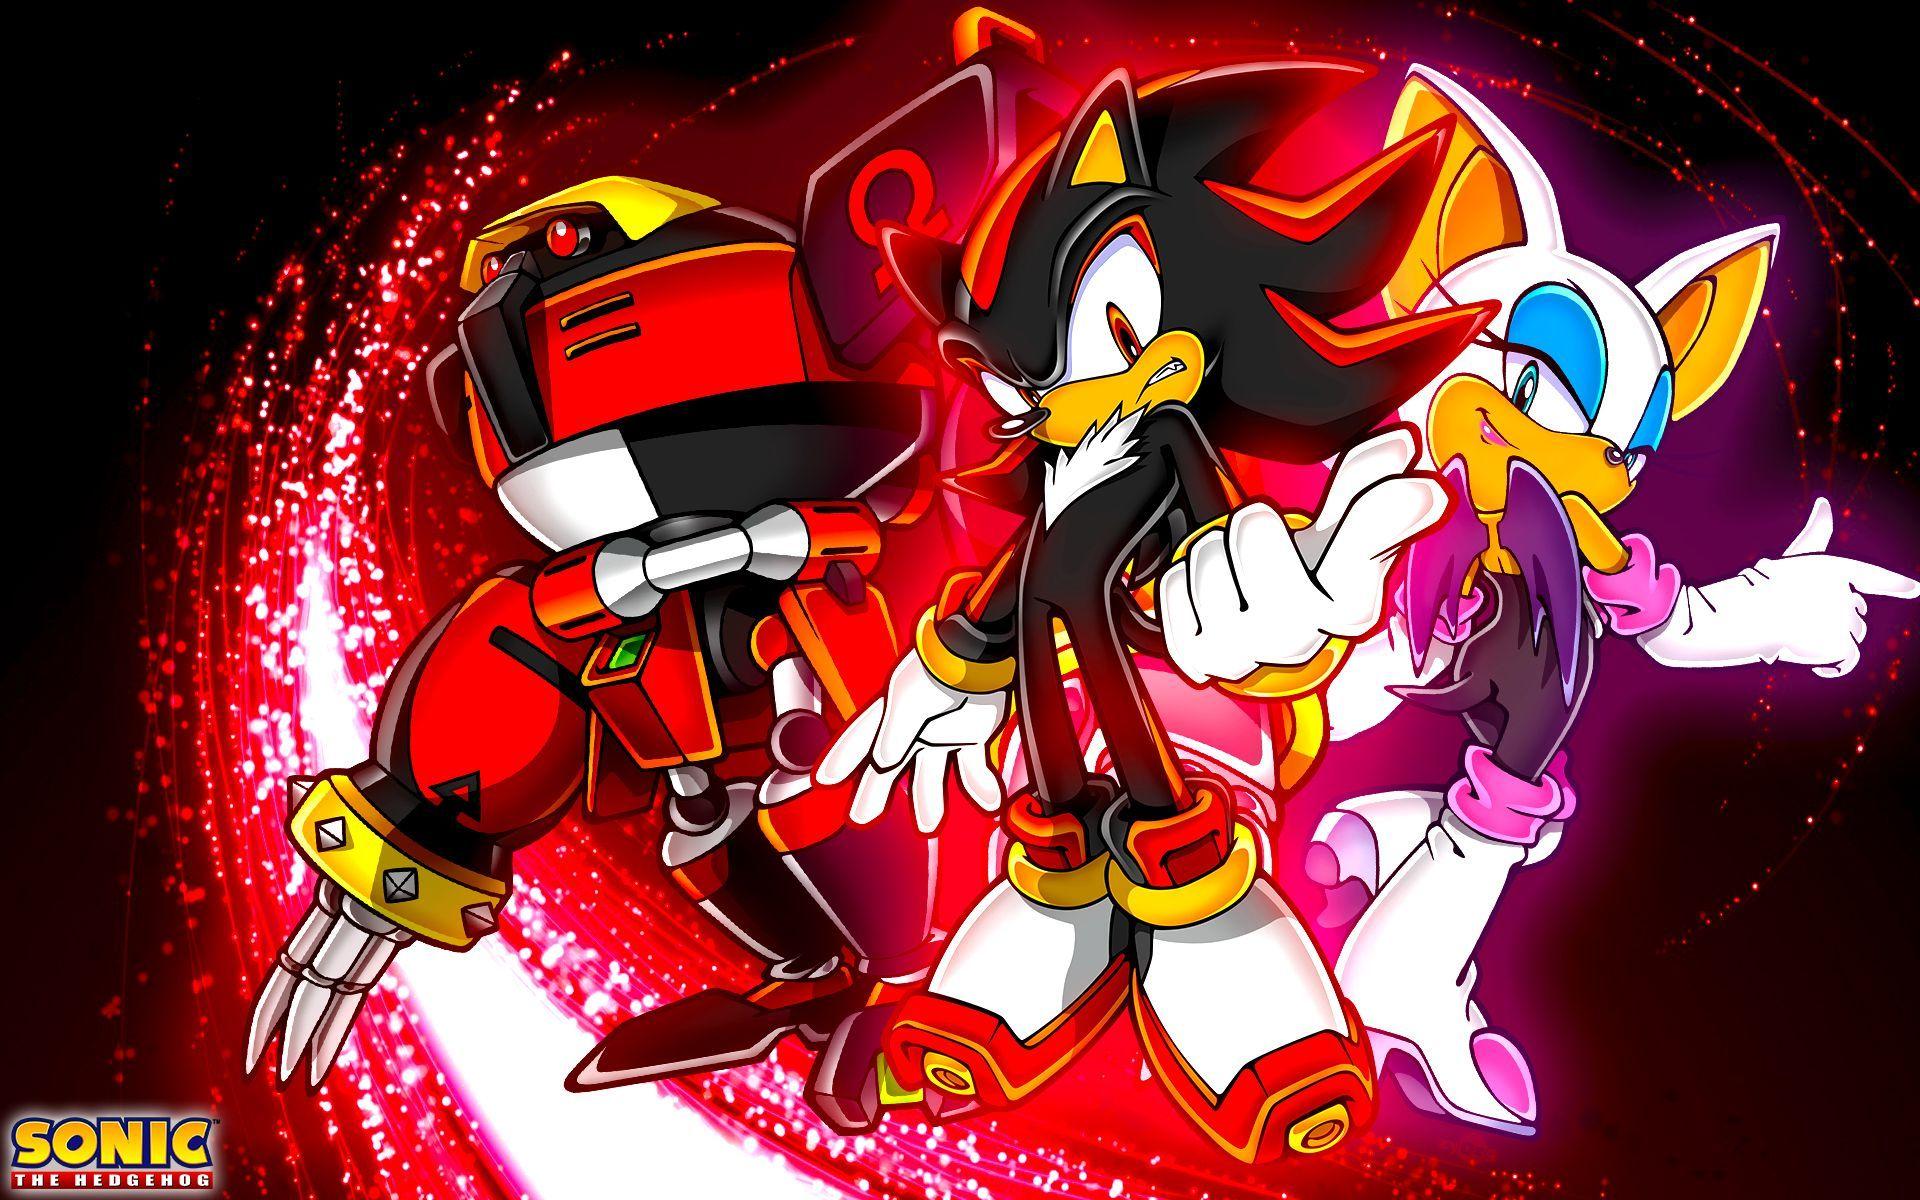 Sonic,Shadow And Silver Wallpapers by SonicTheHedgehogBG.